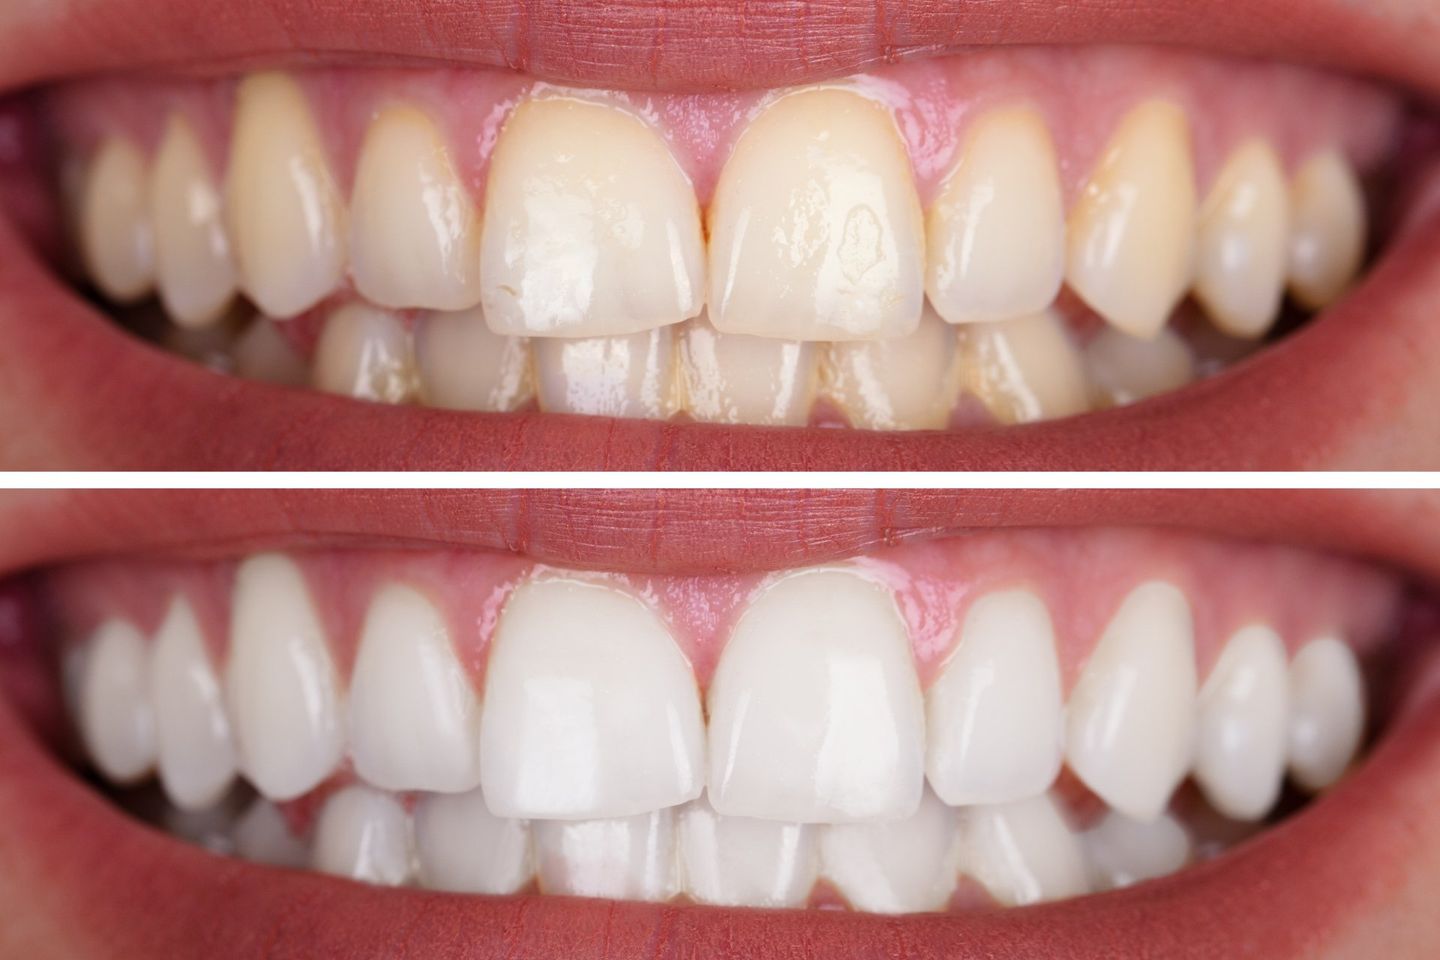 Woman's Teeth Before And After Whitening - Dental Treatments in Port Macquarie, NSW